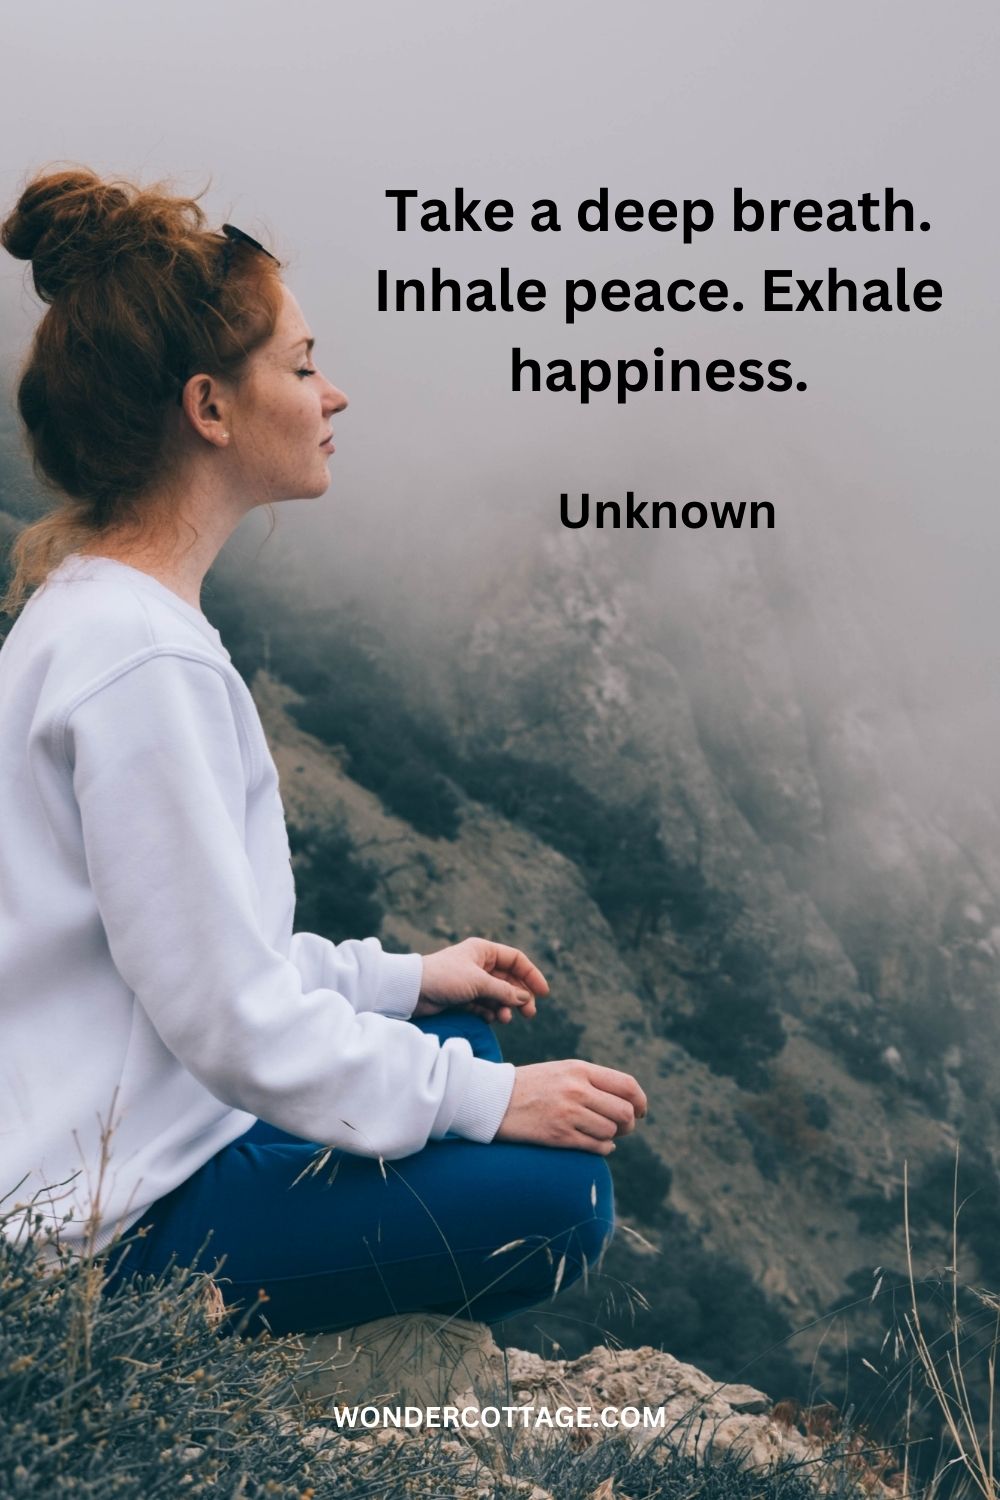 Take a deep breath. Inhale peace. Exhale happiness. Unknown